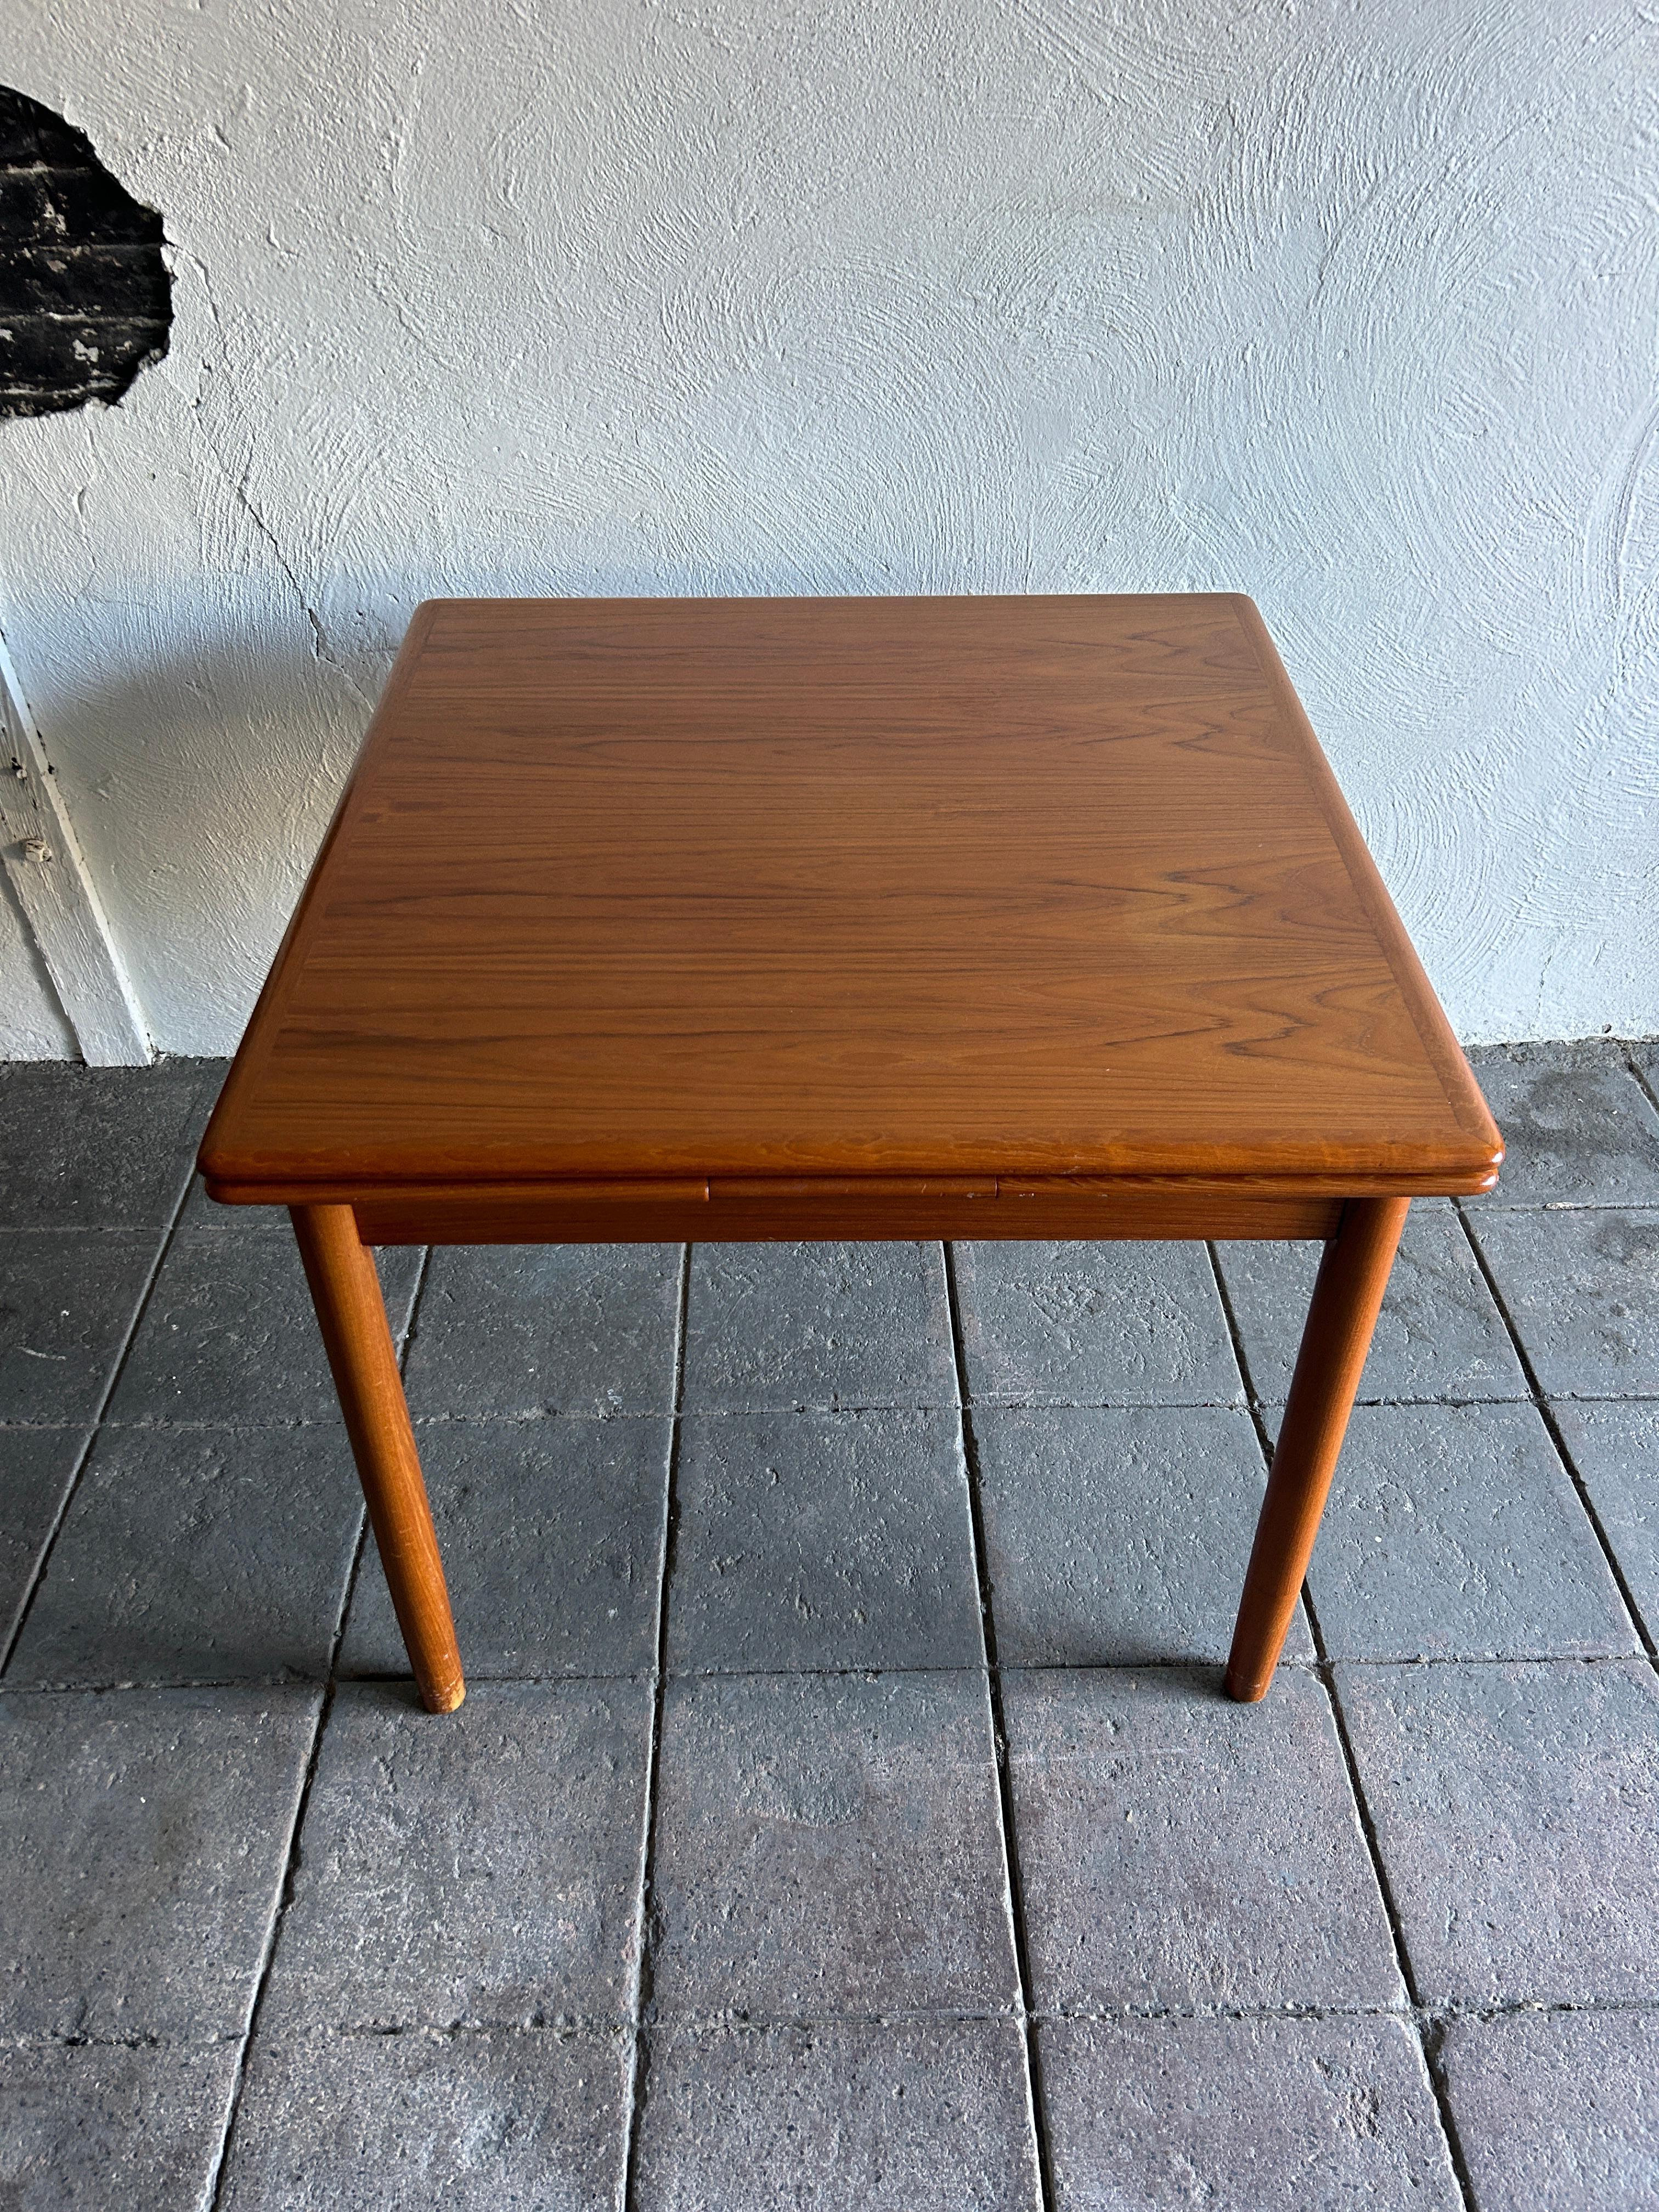 Mid century Danish Modern teak small square extension dining table Beautiful teak table that extends with (2) nesting pull out leaves. The leaves have carved handles under leaf to pull out. Solid teak round legs with a square table top 34” x 34” x